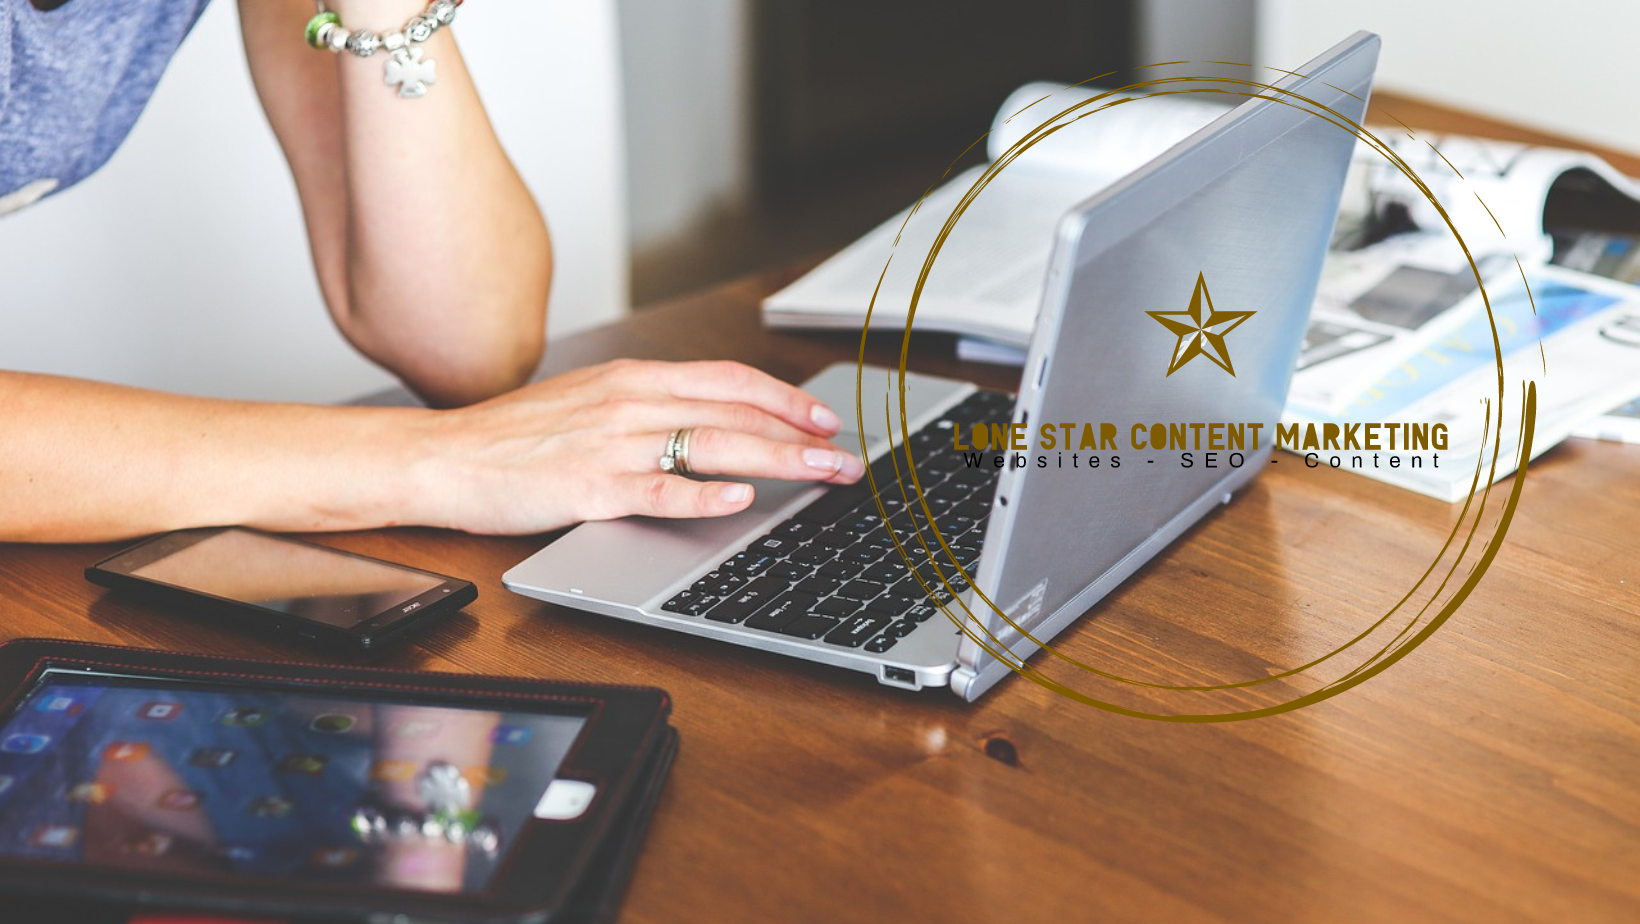 We Write Blog Articles at Lone Star Content Marketing